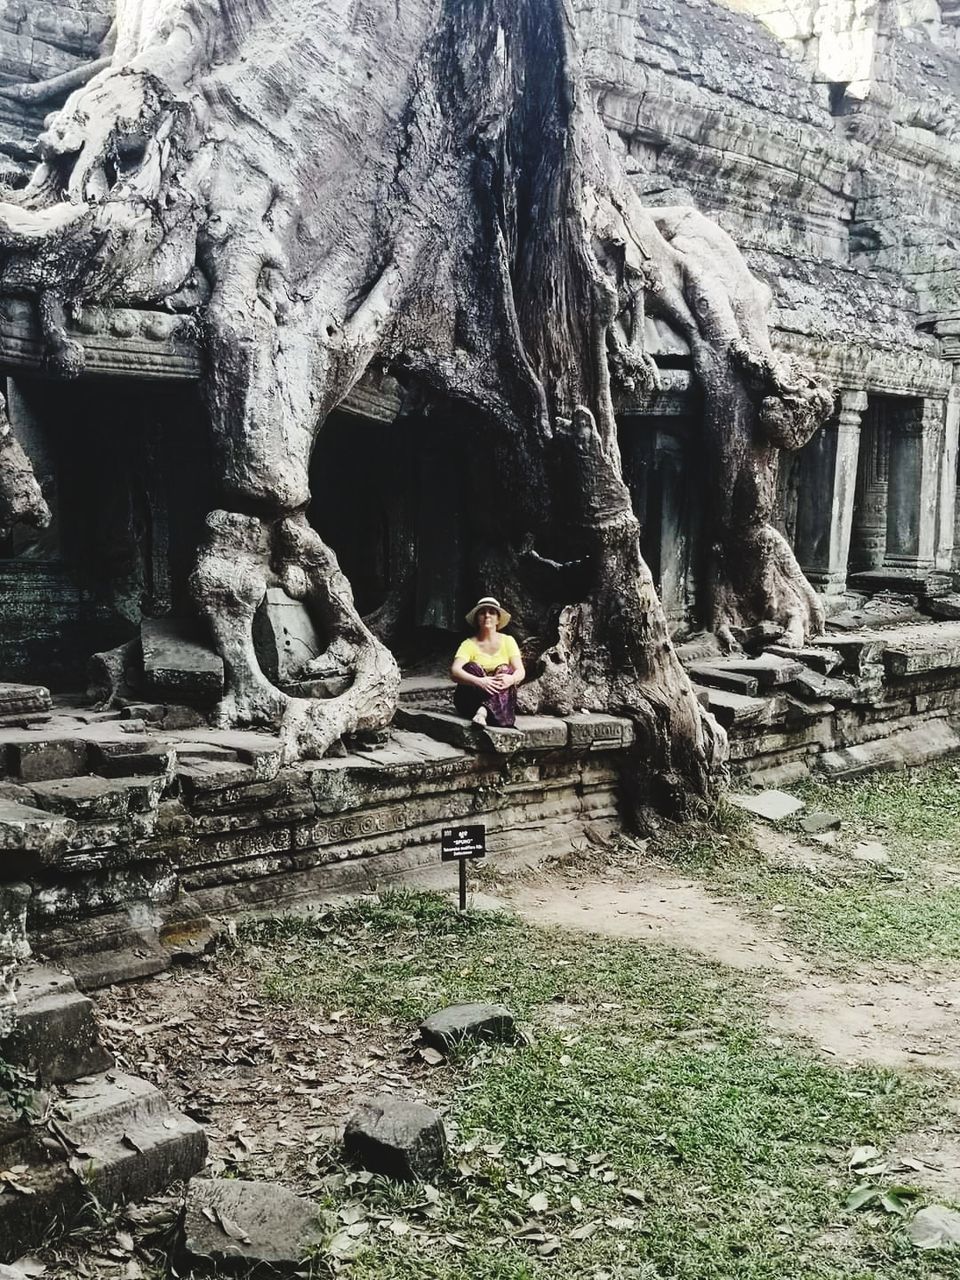 cave, one person, architecture, leisure activity, nature, lifestyles, day, built structure, full length, adult, rock, men, history, women, outdoors, ruins, plant, land, the past, sitting, ancient, tree, rock formation, travel, geology, ancient history, old ruin, young adult, building, religion, activity, female